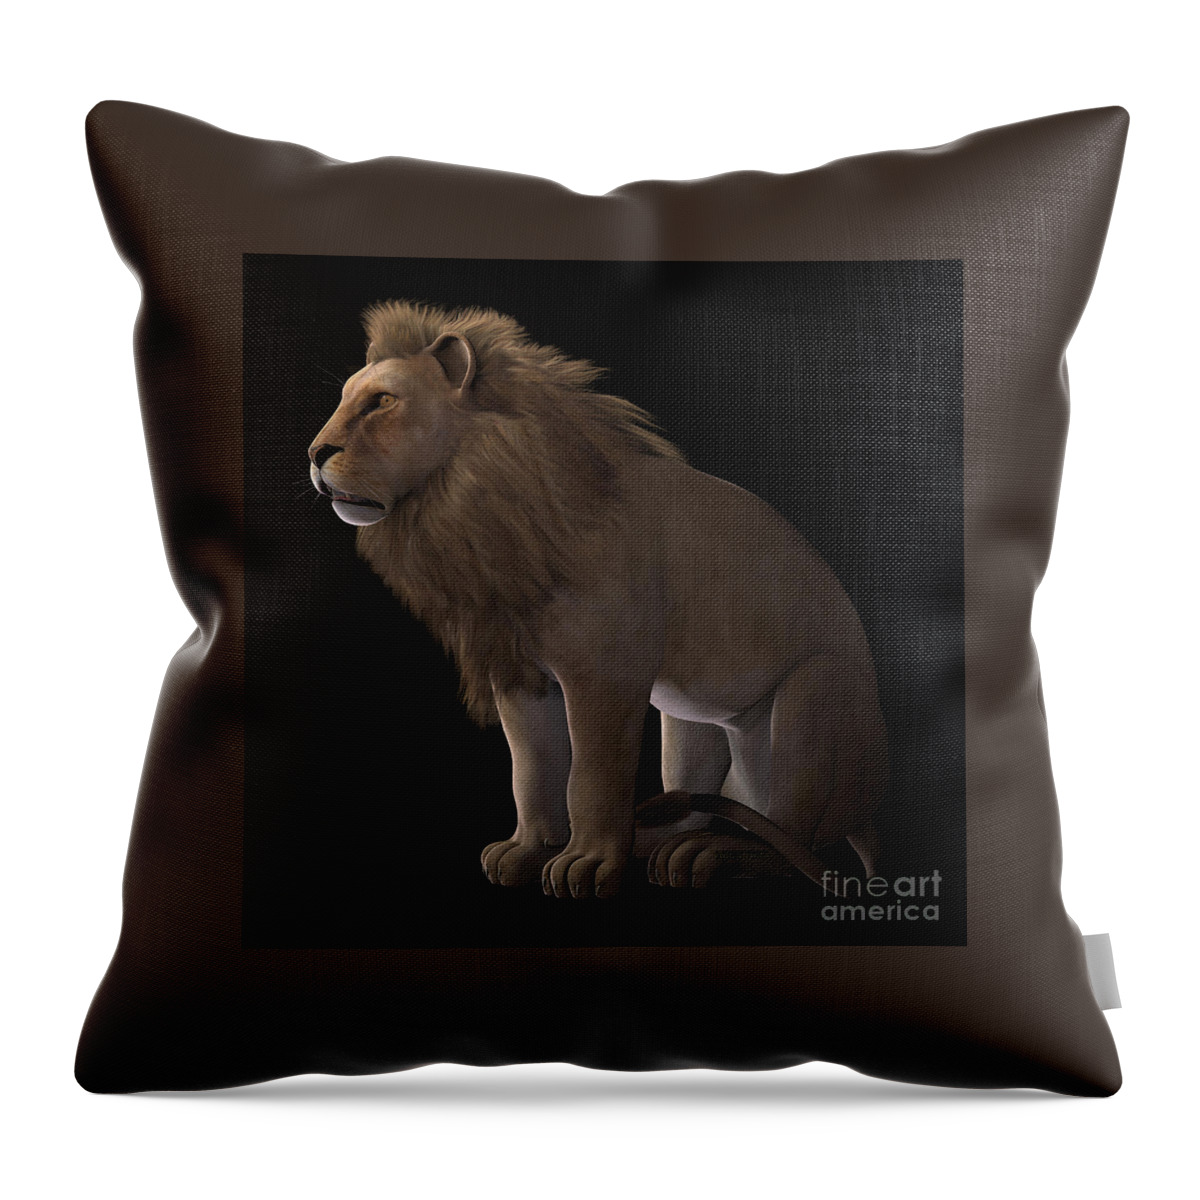 Lion Throw Pillow featuring the painting African Lion on Black by Corey Ford